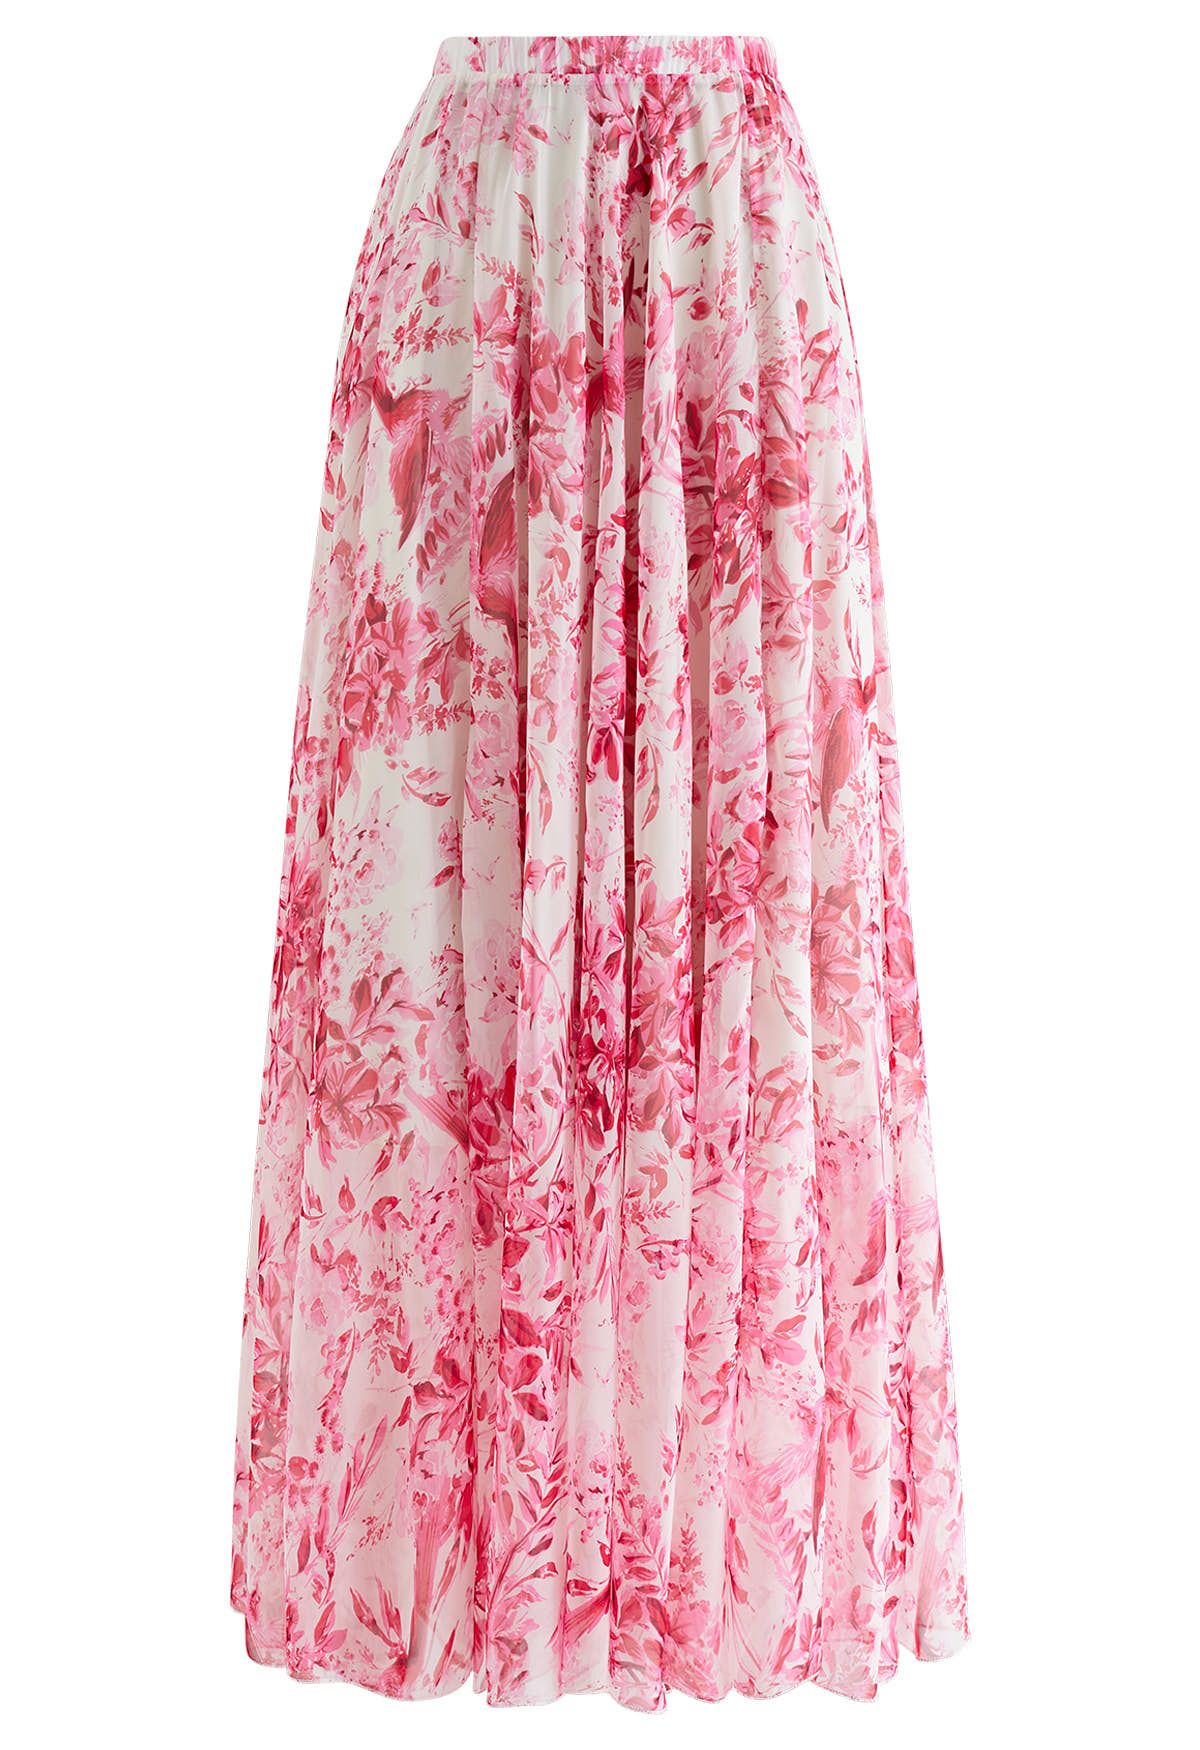 Summer Forest Printed Chiffon Maxi Skirt in Pink - Retro, Indie and ...